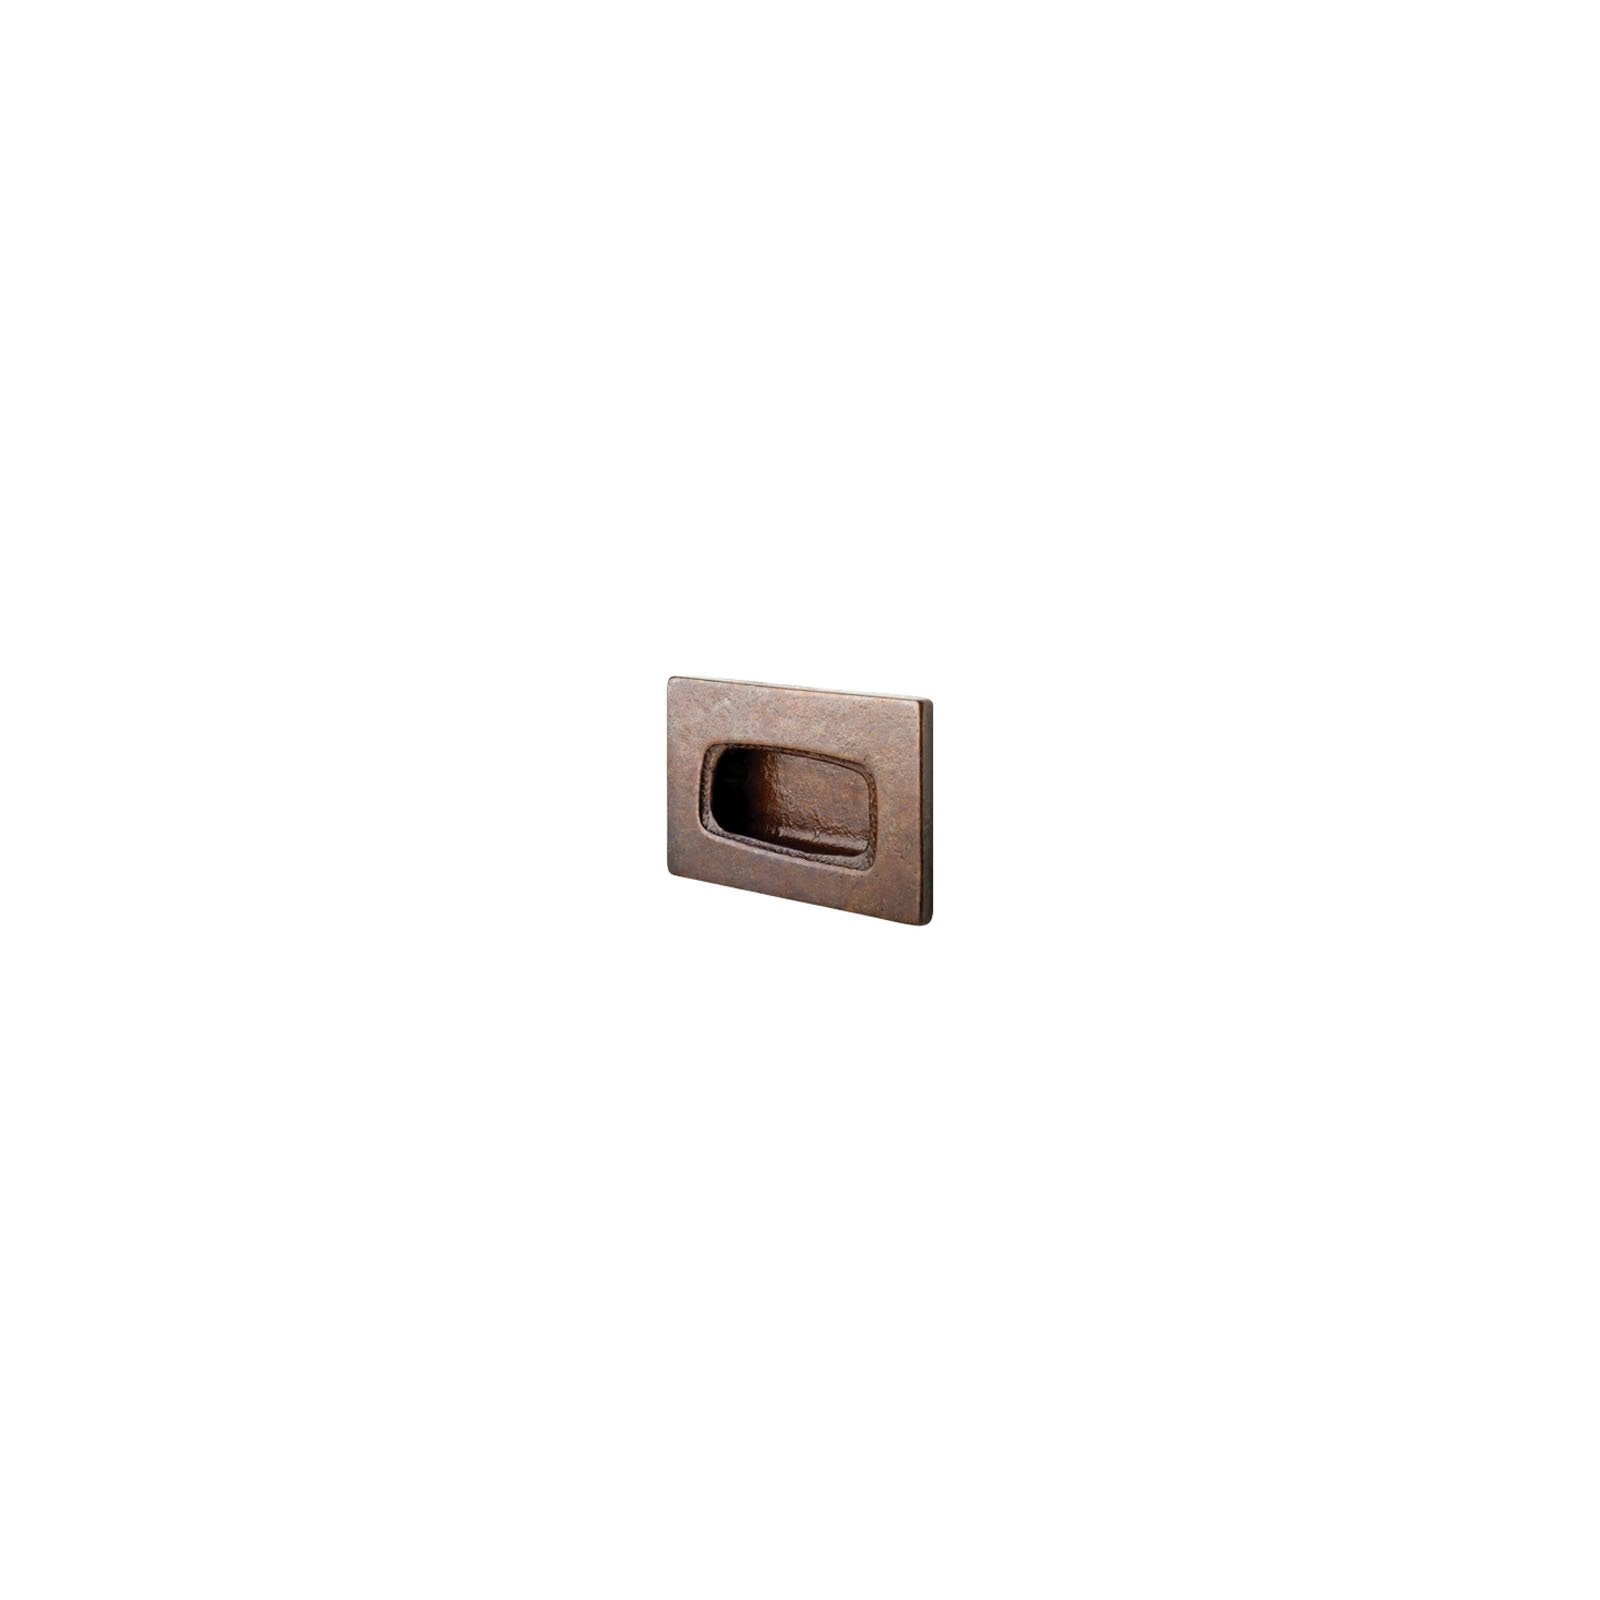 Rocky Mountain Hardware CK20145 - 1 7/8" x 3" Tab Cabinet Pull